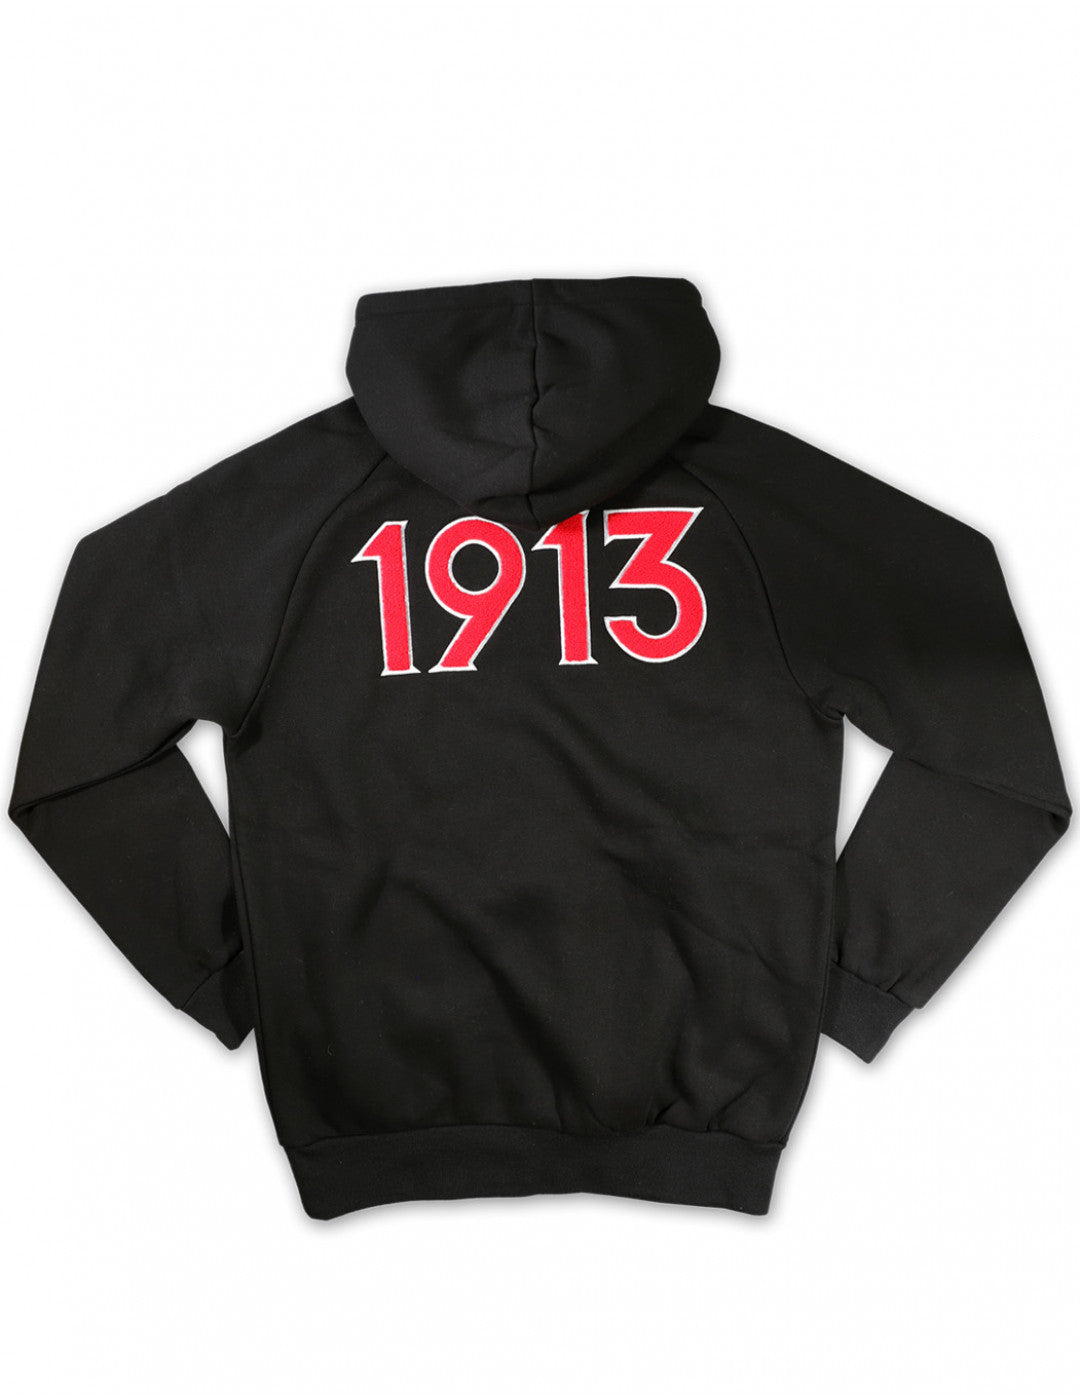 New 1913 Fall Chenille Hoodie